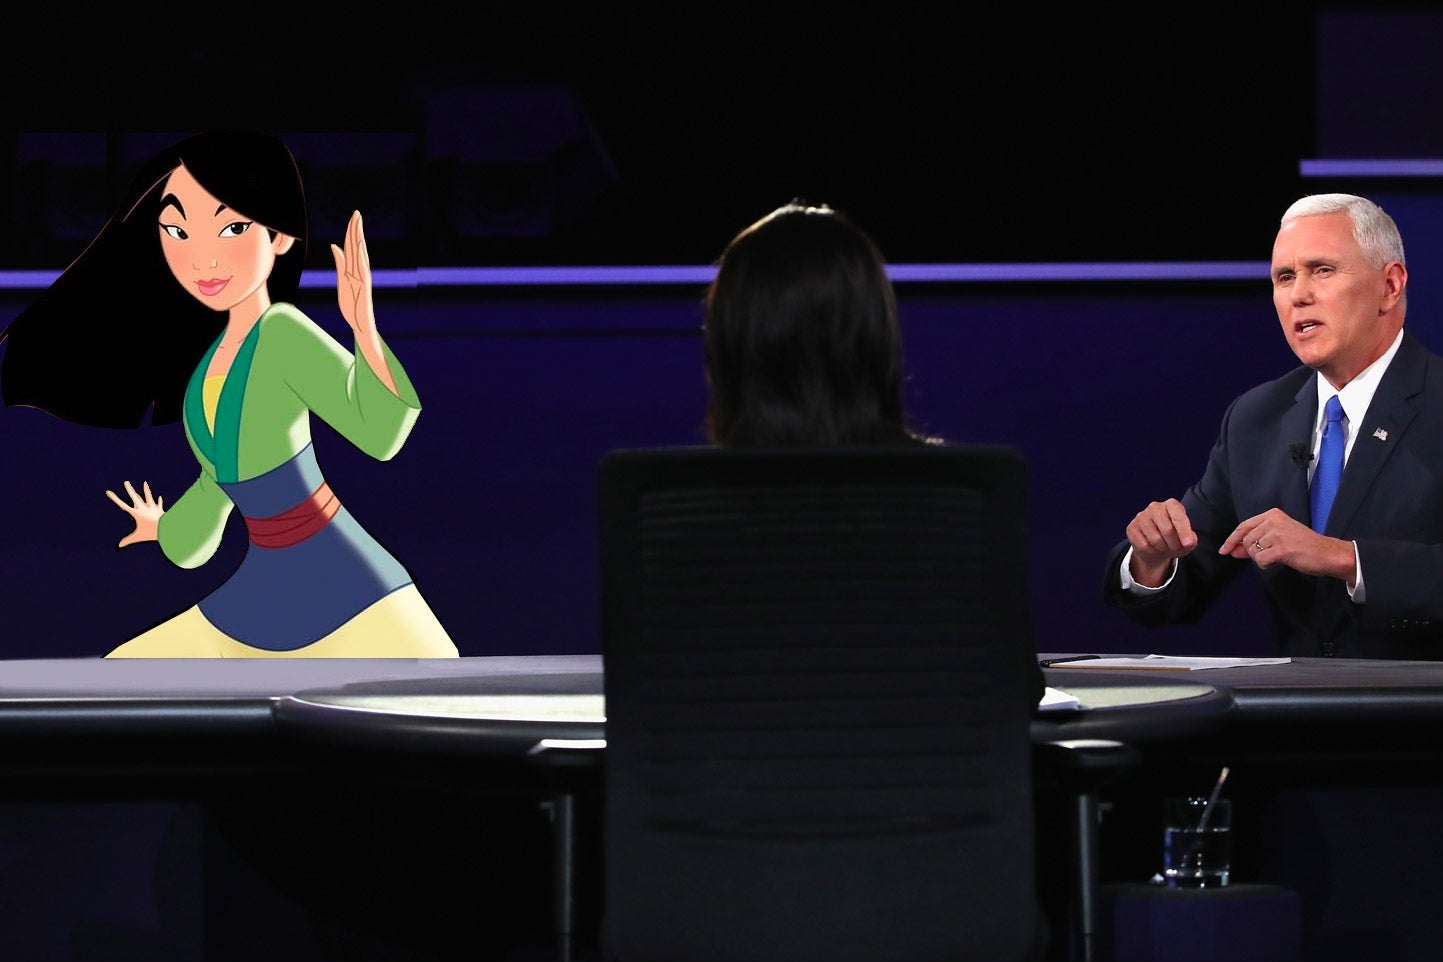 On the right, Mike Pence sits down for the debate. On the left, Hua Mulan.